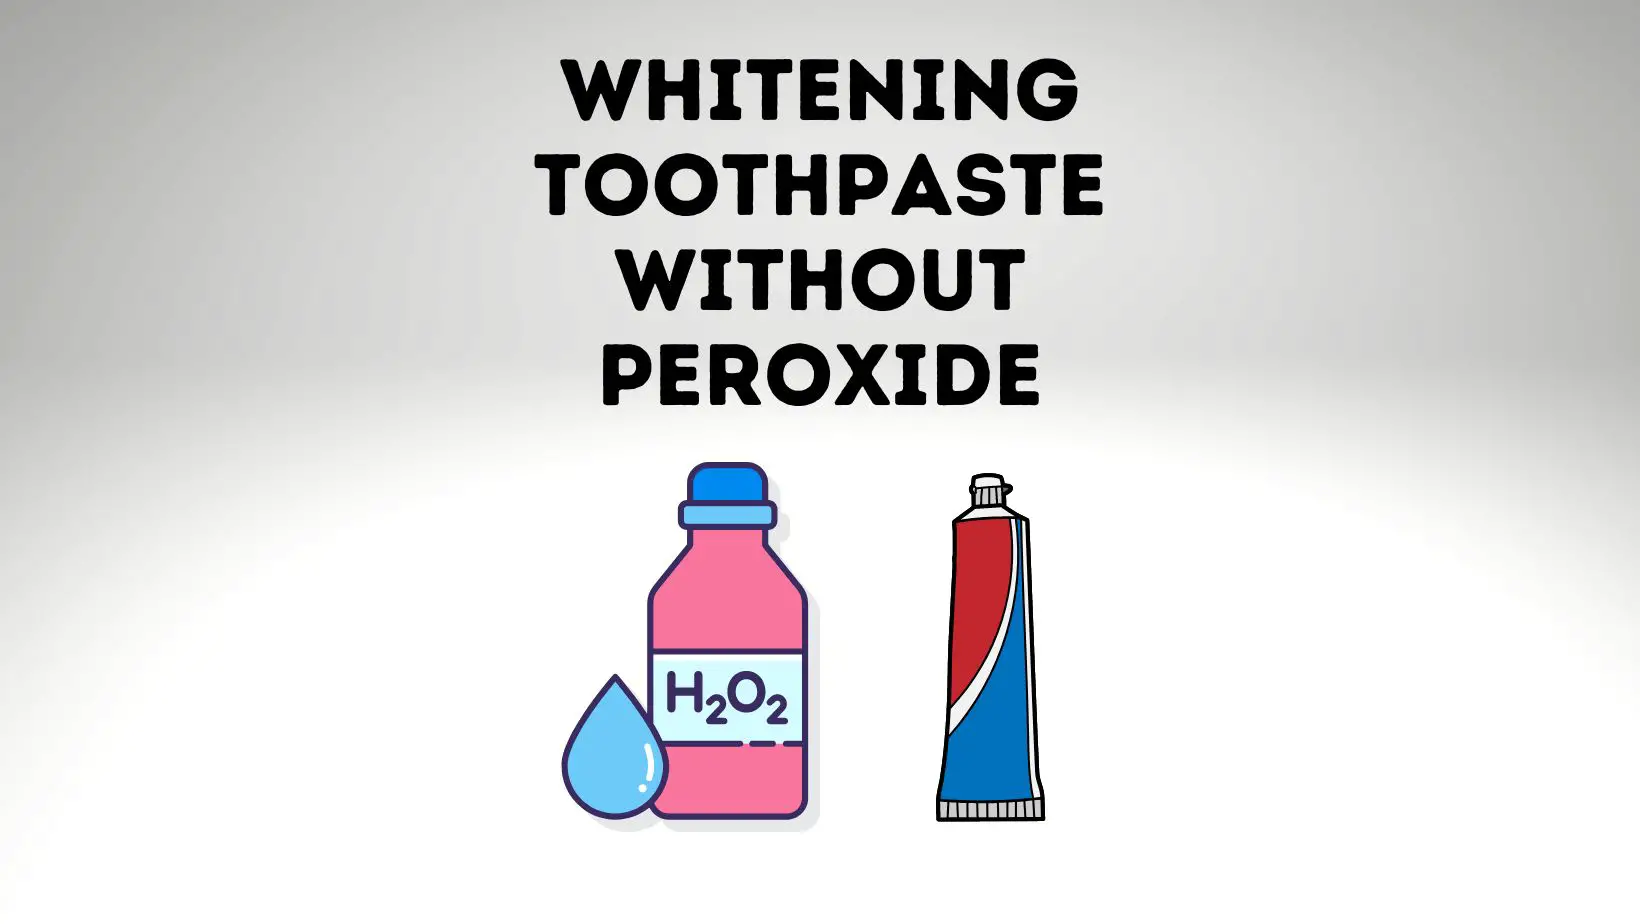 Whitening Toothpaste Without Peroxide